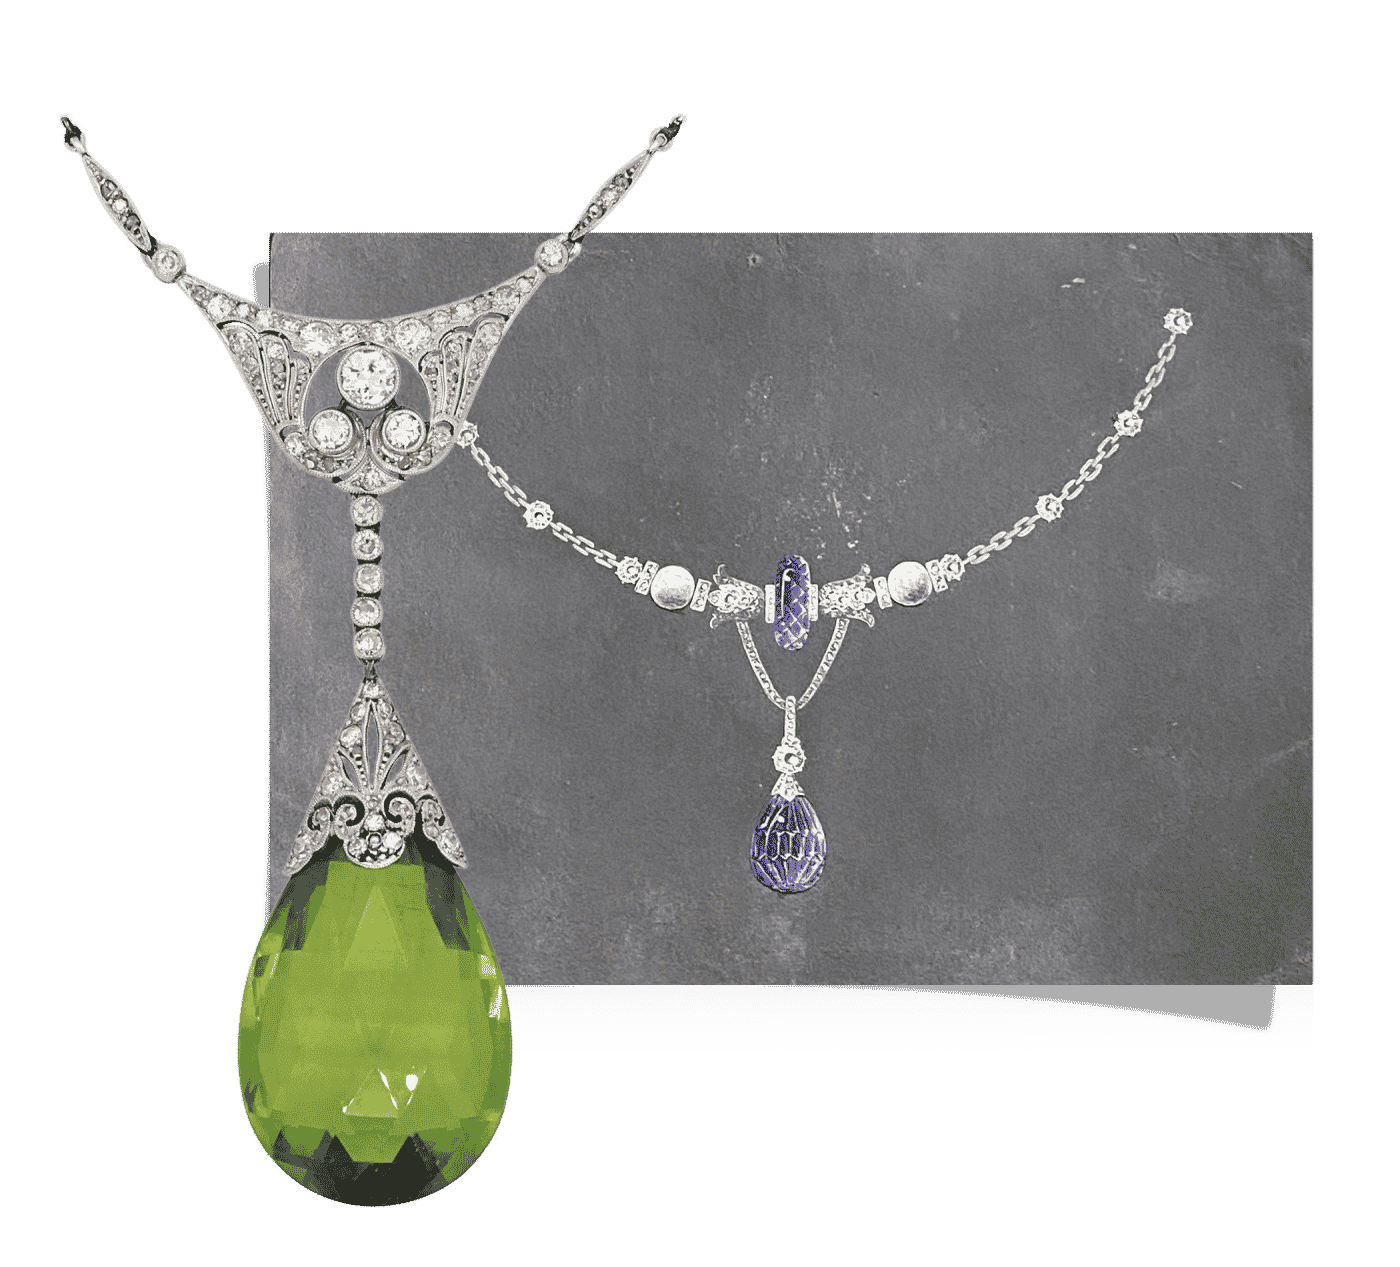 A PERIDOT BRIOLETTE AND DIAMOND NECKLACE, 1910s, and a drawing of a circa-1920 necklace with briollete-cut amethysts and old cut diamonds